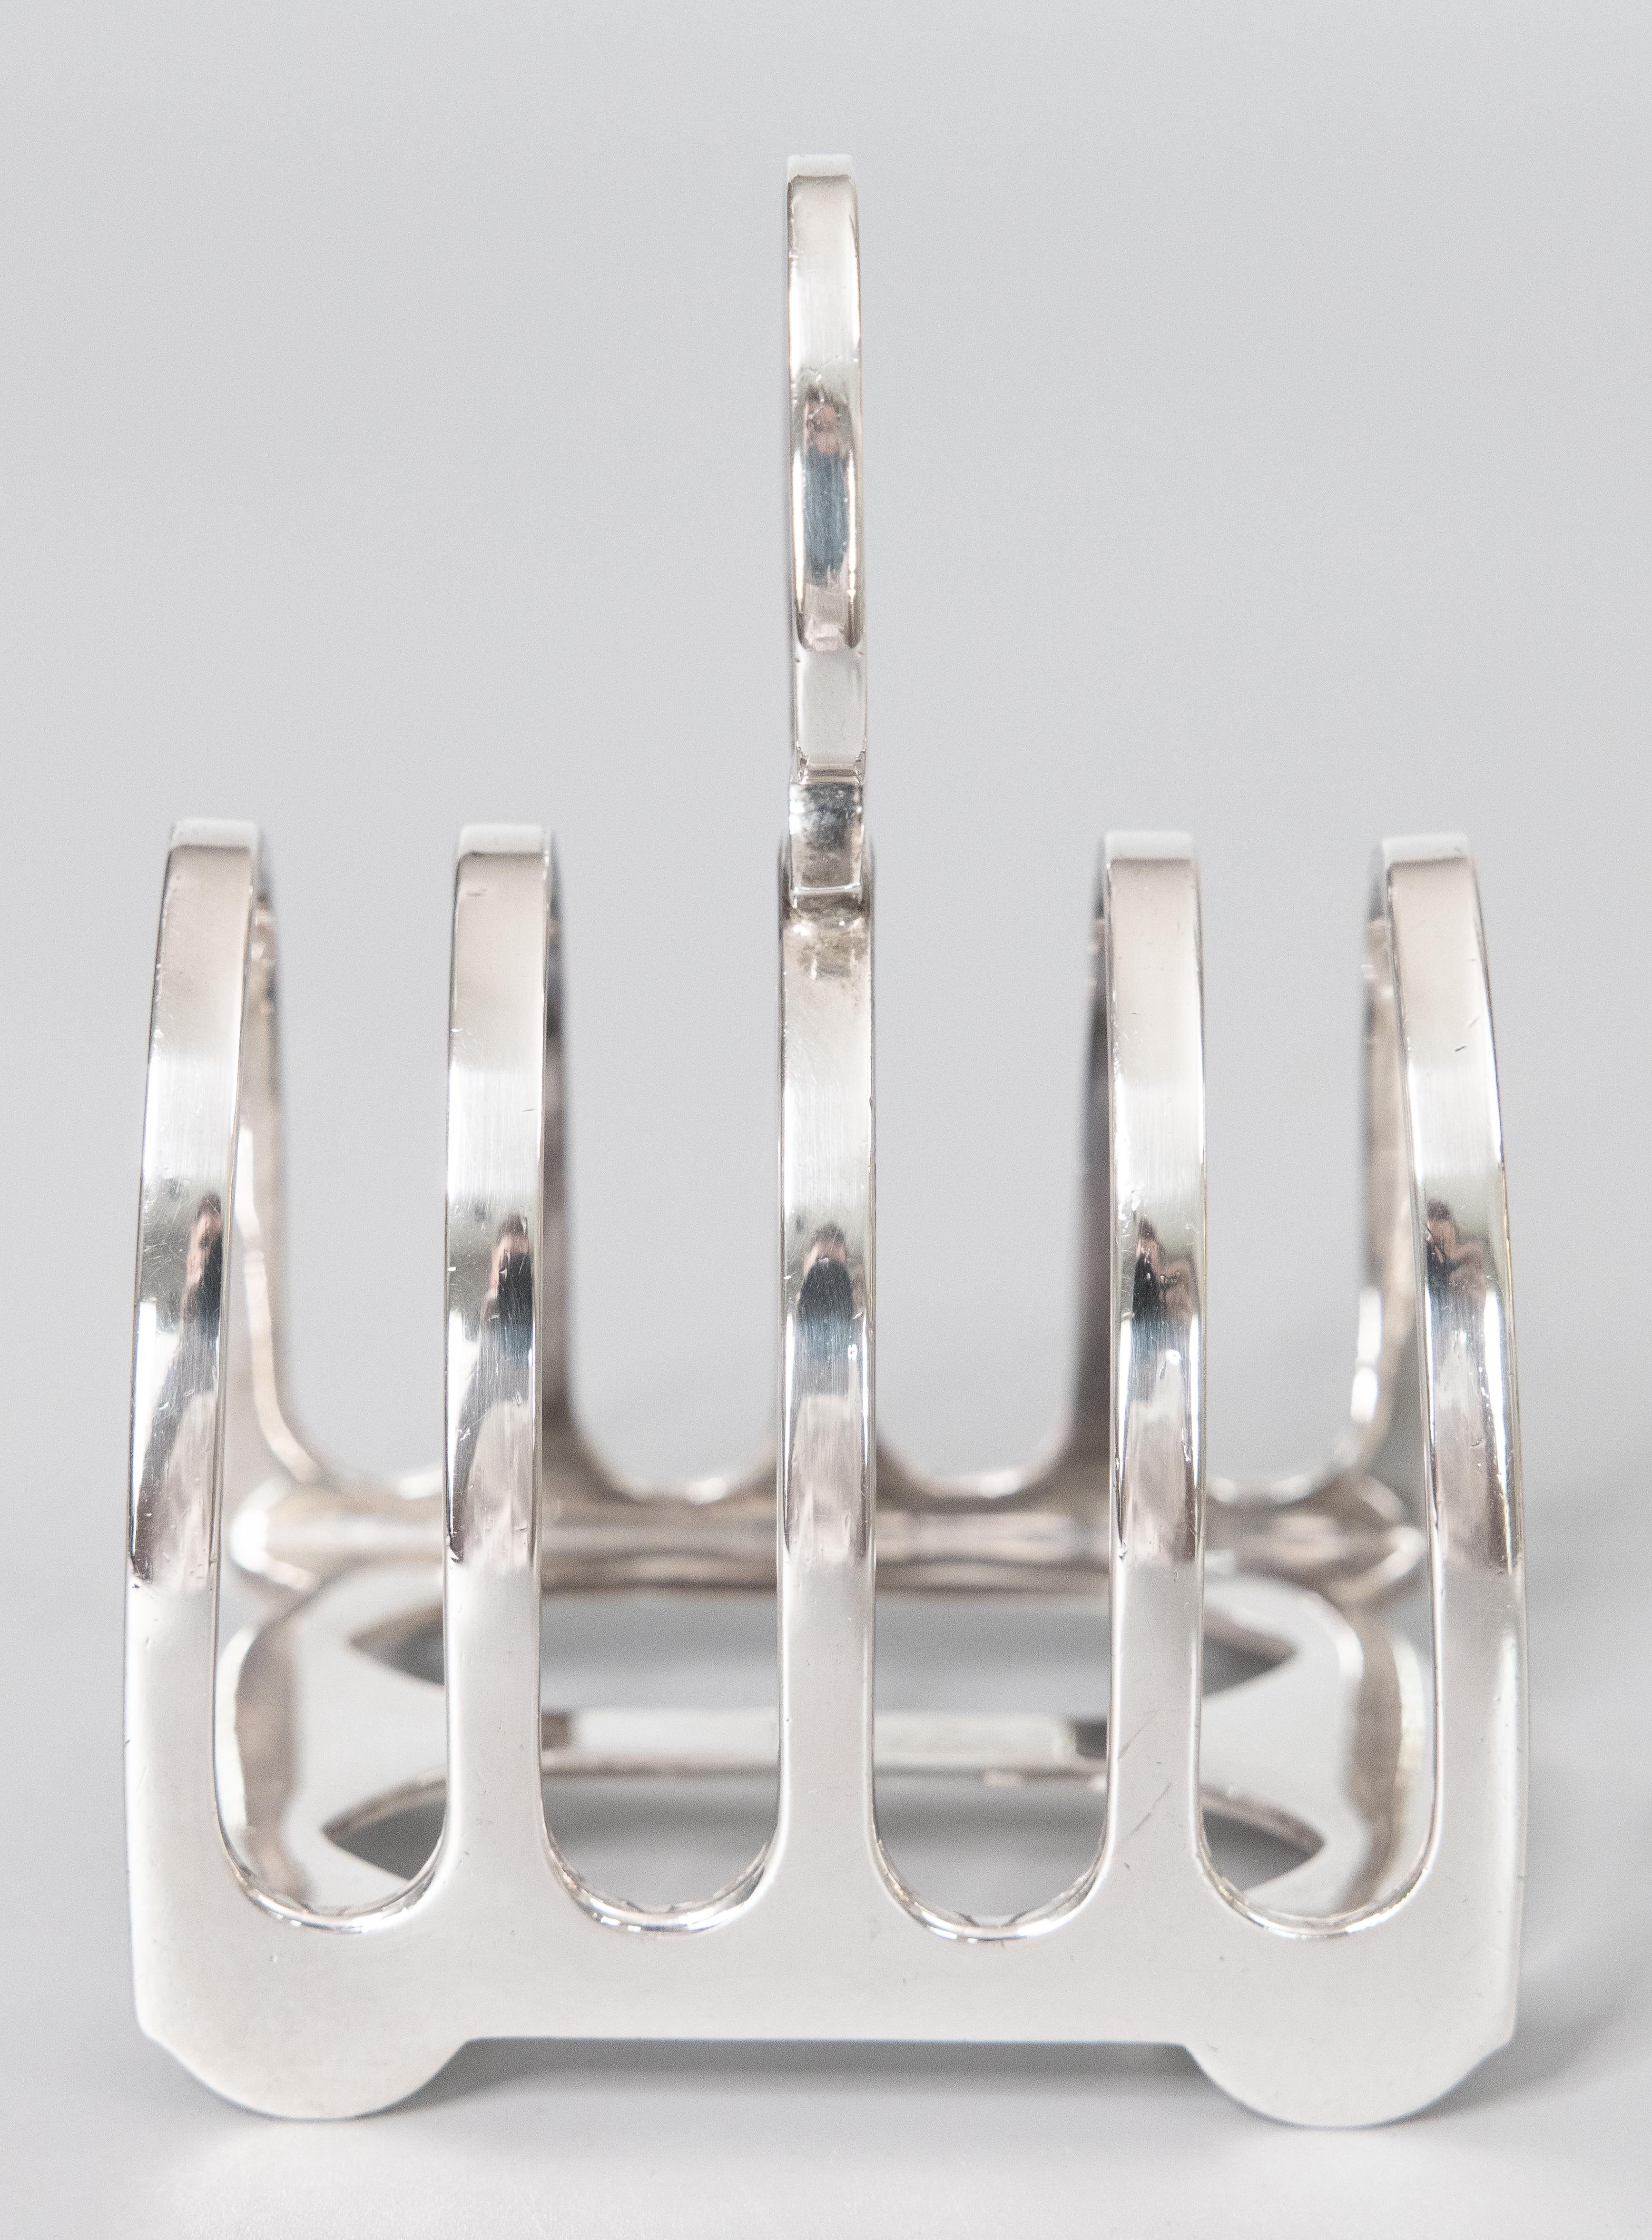 A lovely vintage silverplated four slice toast rack by Elkington made in England, dated 1949. Marked on reverse. This fine quality silver toast rack is well made with with a lovely Art Deco style geometric shape and decorative finial. It would be